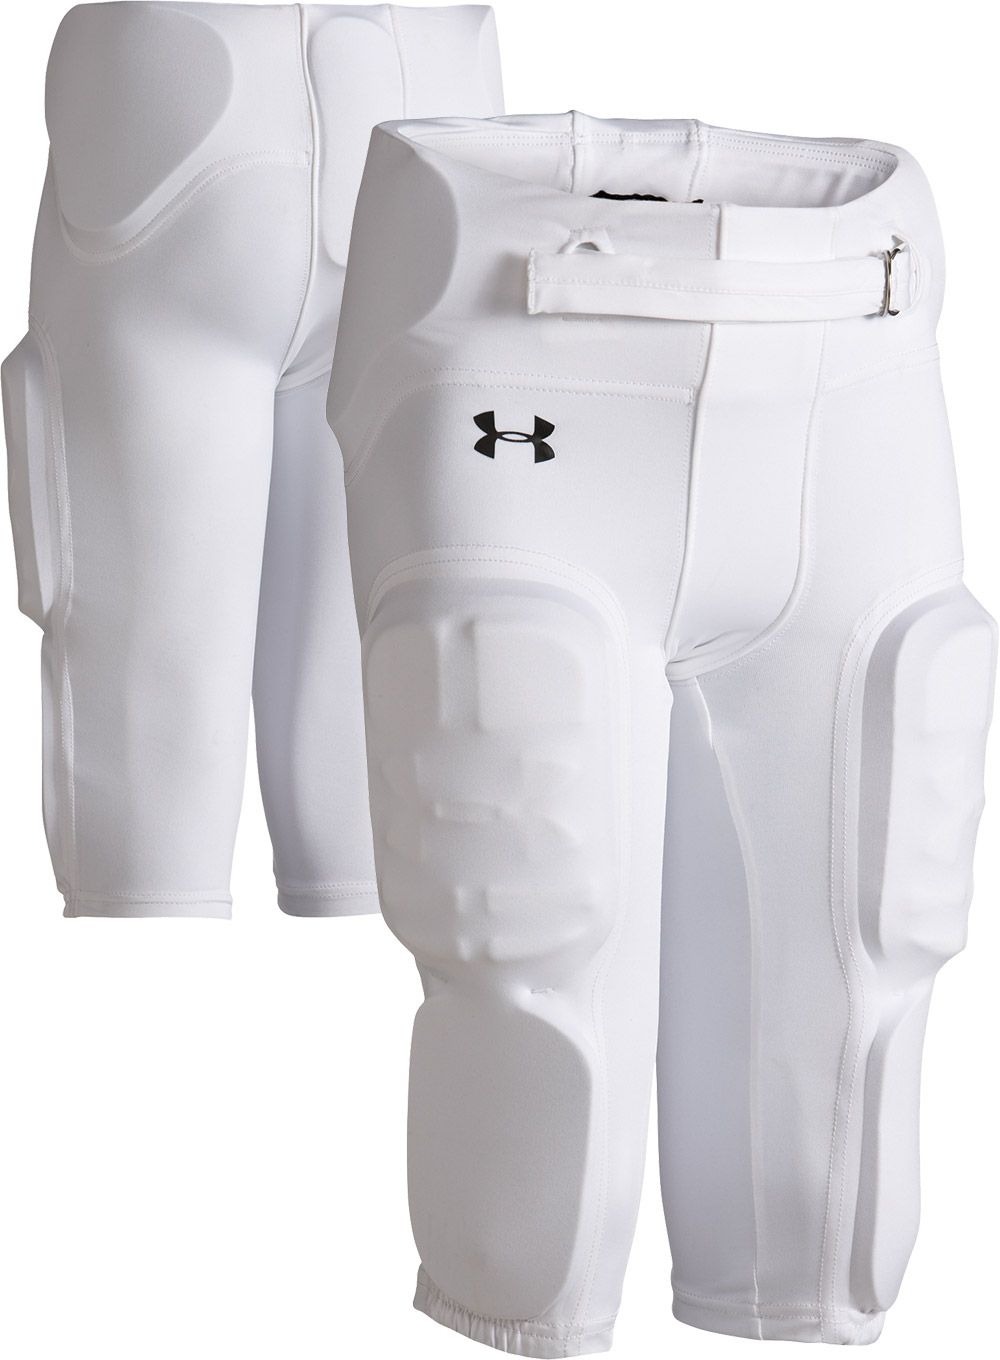 Under Armour Men's Integrated Football Pant 